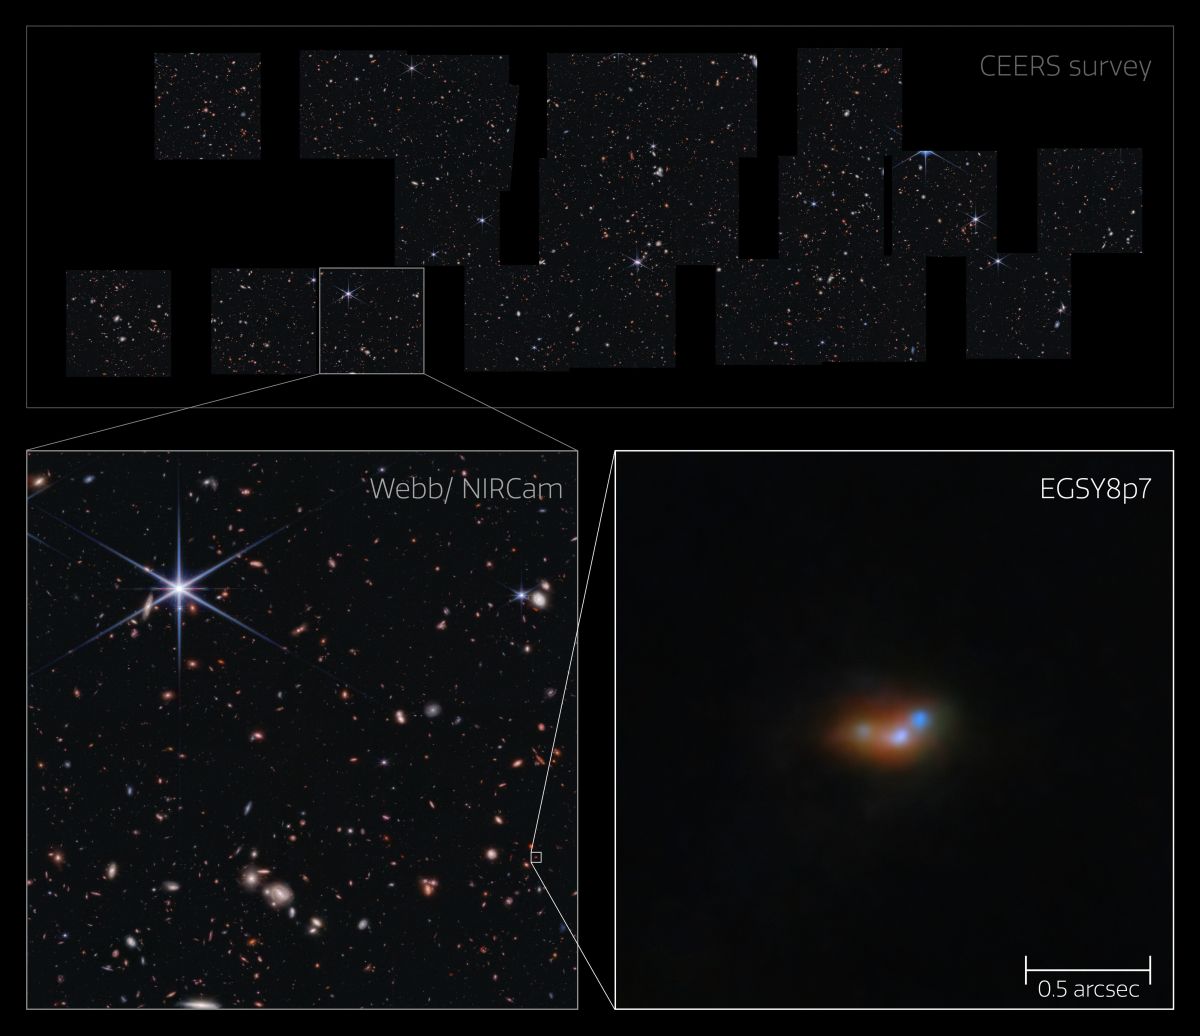 This image shows the galaxy EGSY8p7, a bright galaxy in the early Universe where light emission is seen from, among other things, excited hydrogen atoms — Lyman-alpha emission. Scientists look to this and other young galaxies to understand the role that dark matter plays in early cosmic history.